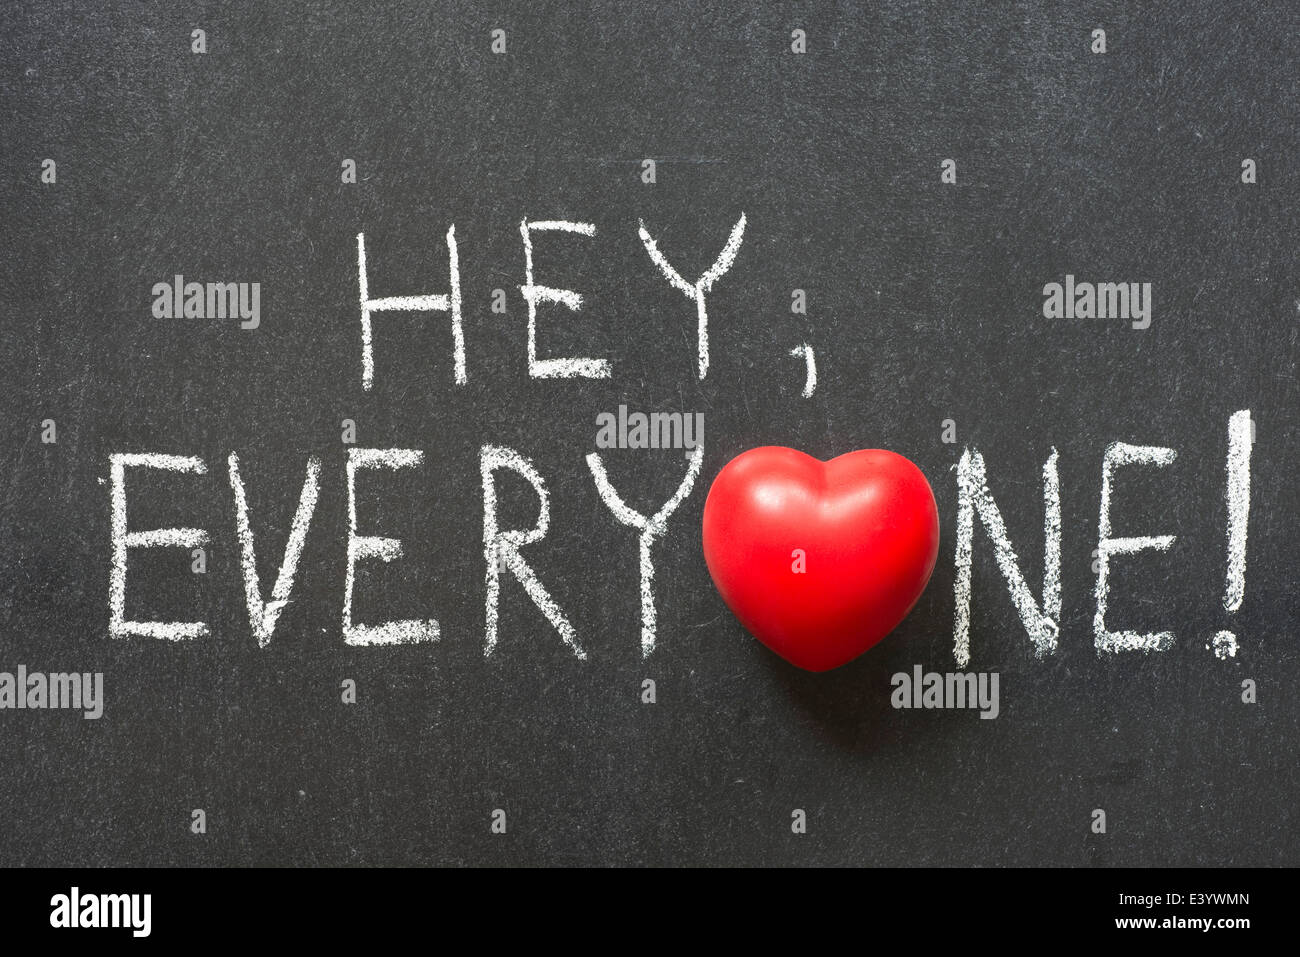 hey, everyone exclamation handwritten on chalkboard with heart symbol instead of O Stock Photo